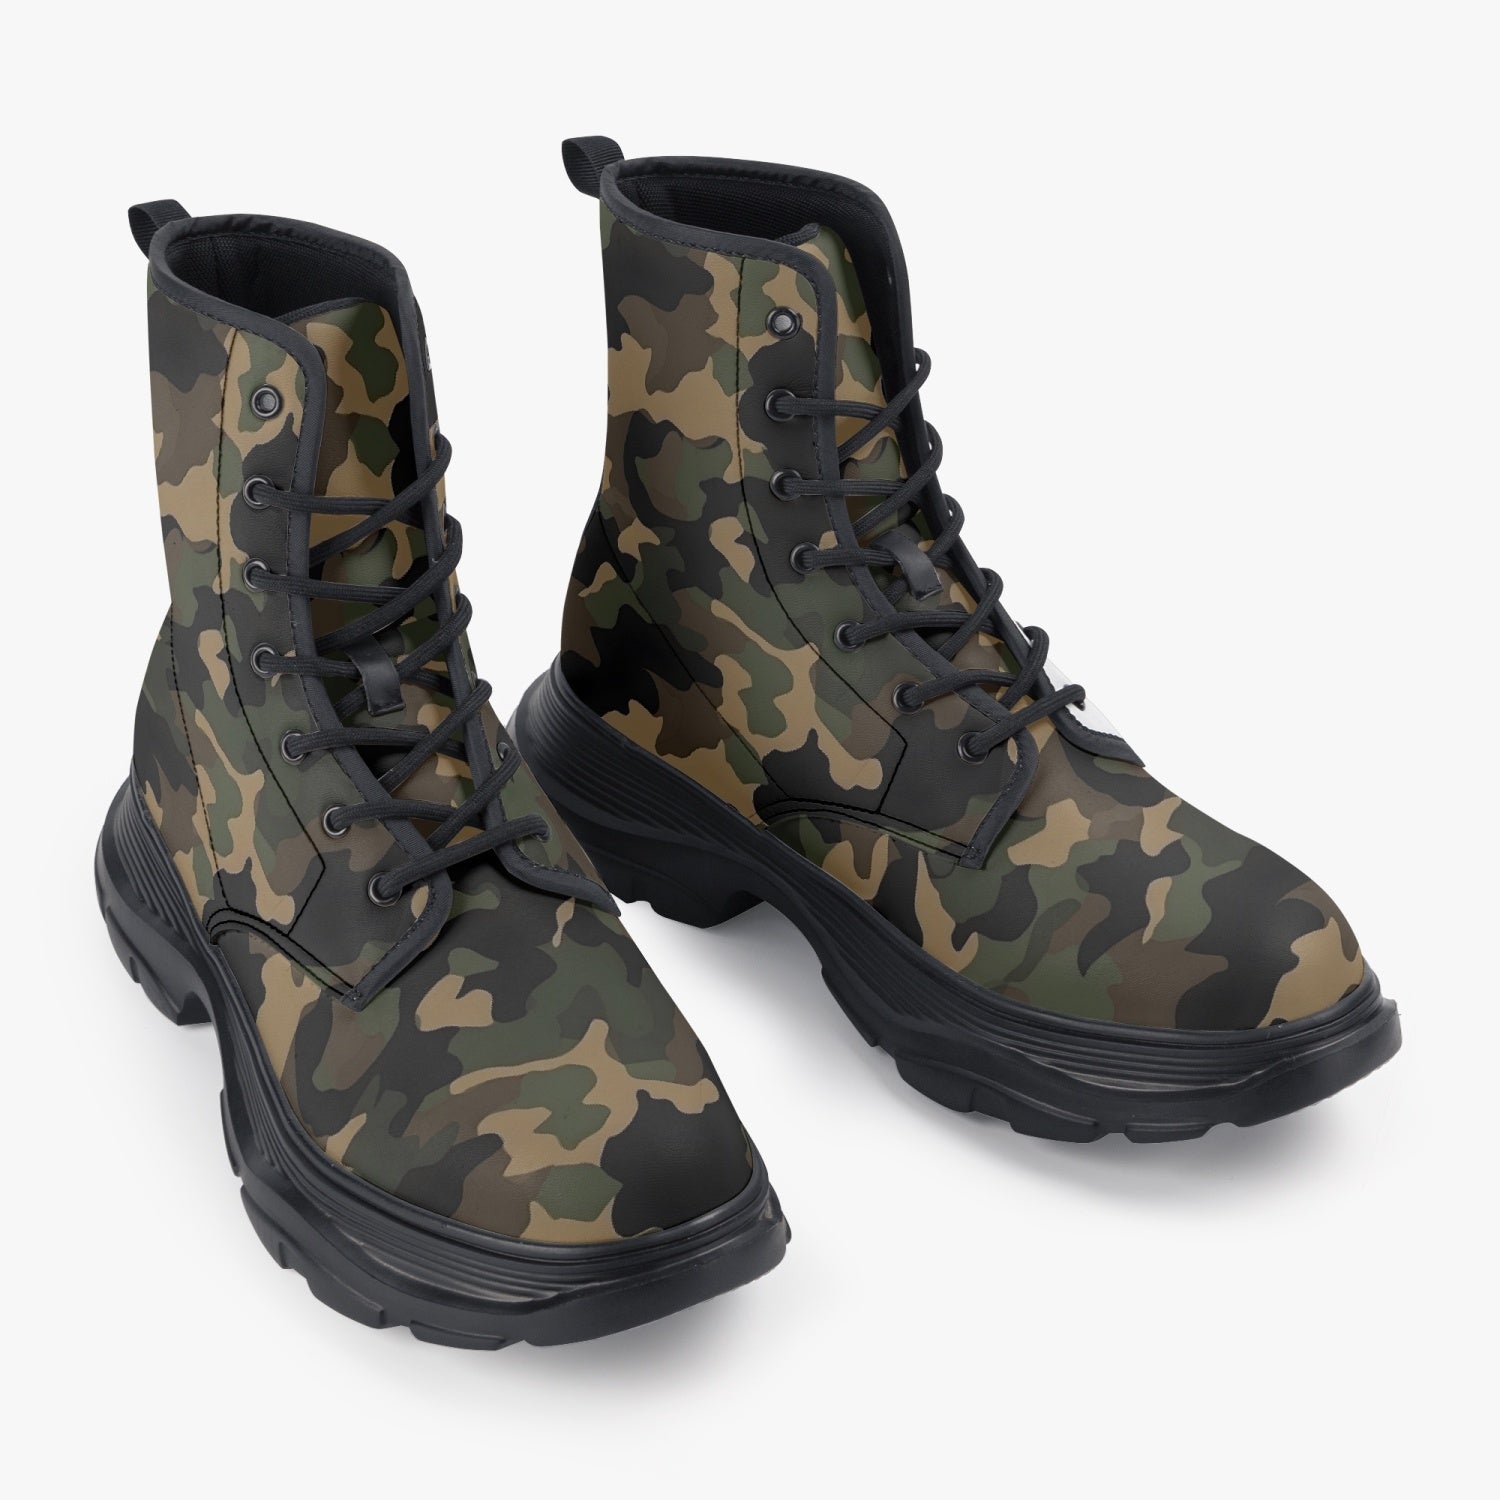 Camo Leather Chunky Boots, Camouflage Green Brown Lace Up Shoes Hiking Women Men Female Festival Black Ankle Combat Work Winter Casual Starcove Fashion